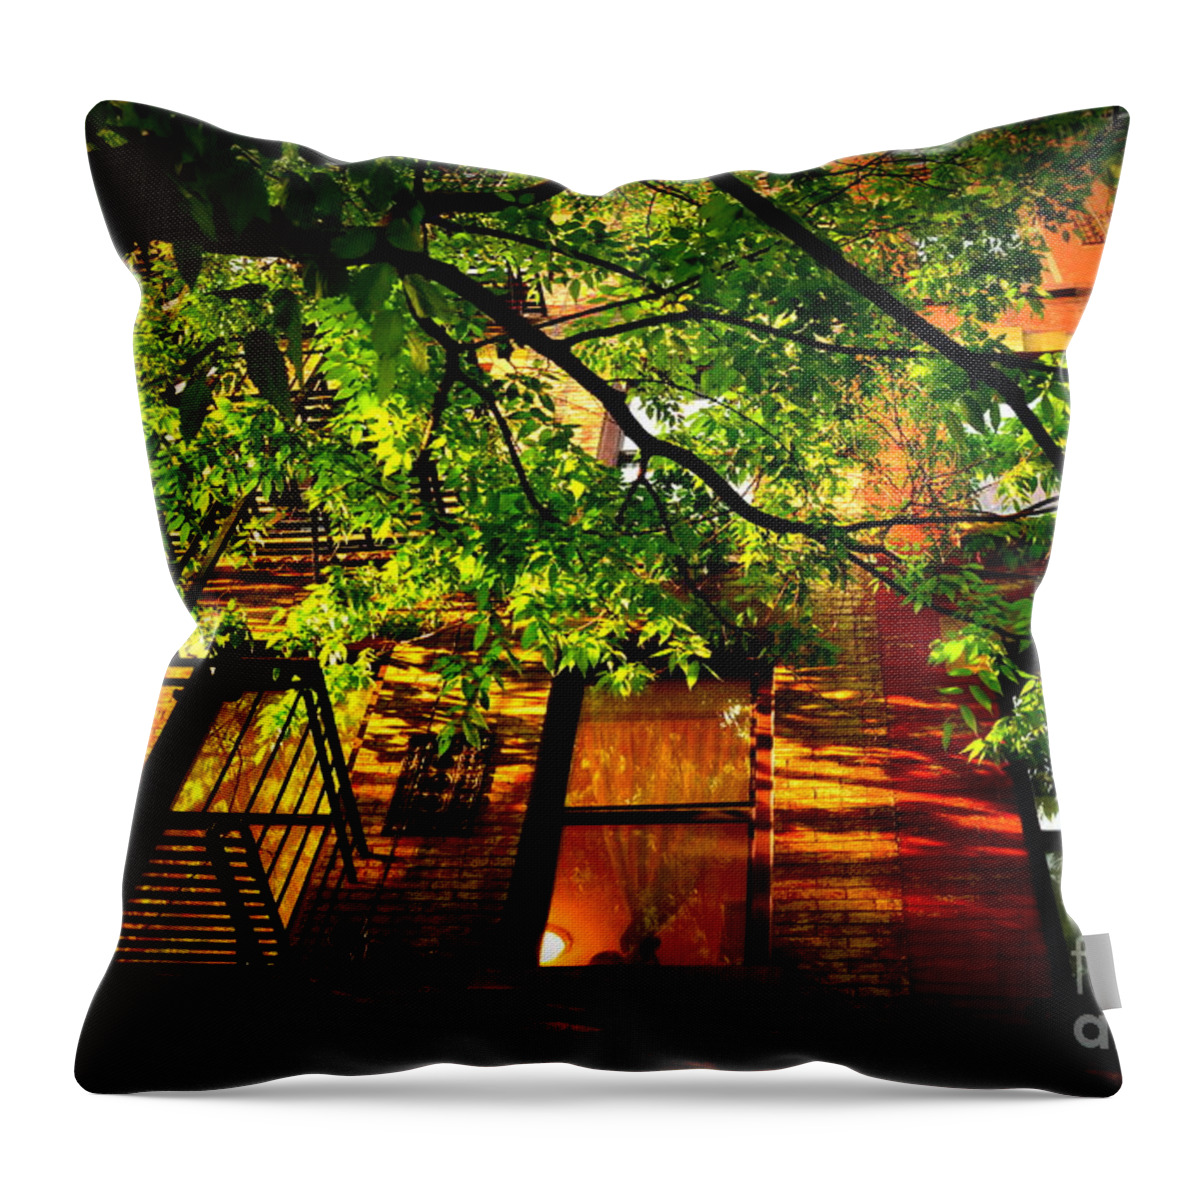 New York Throw Pillow featuring the photograph Welcoming Window - The Lights of Home by Miriam Danar